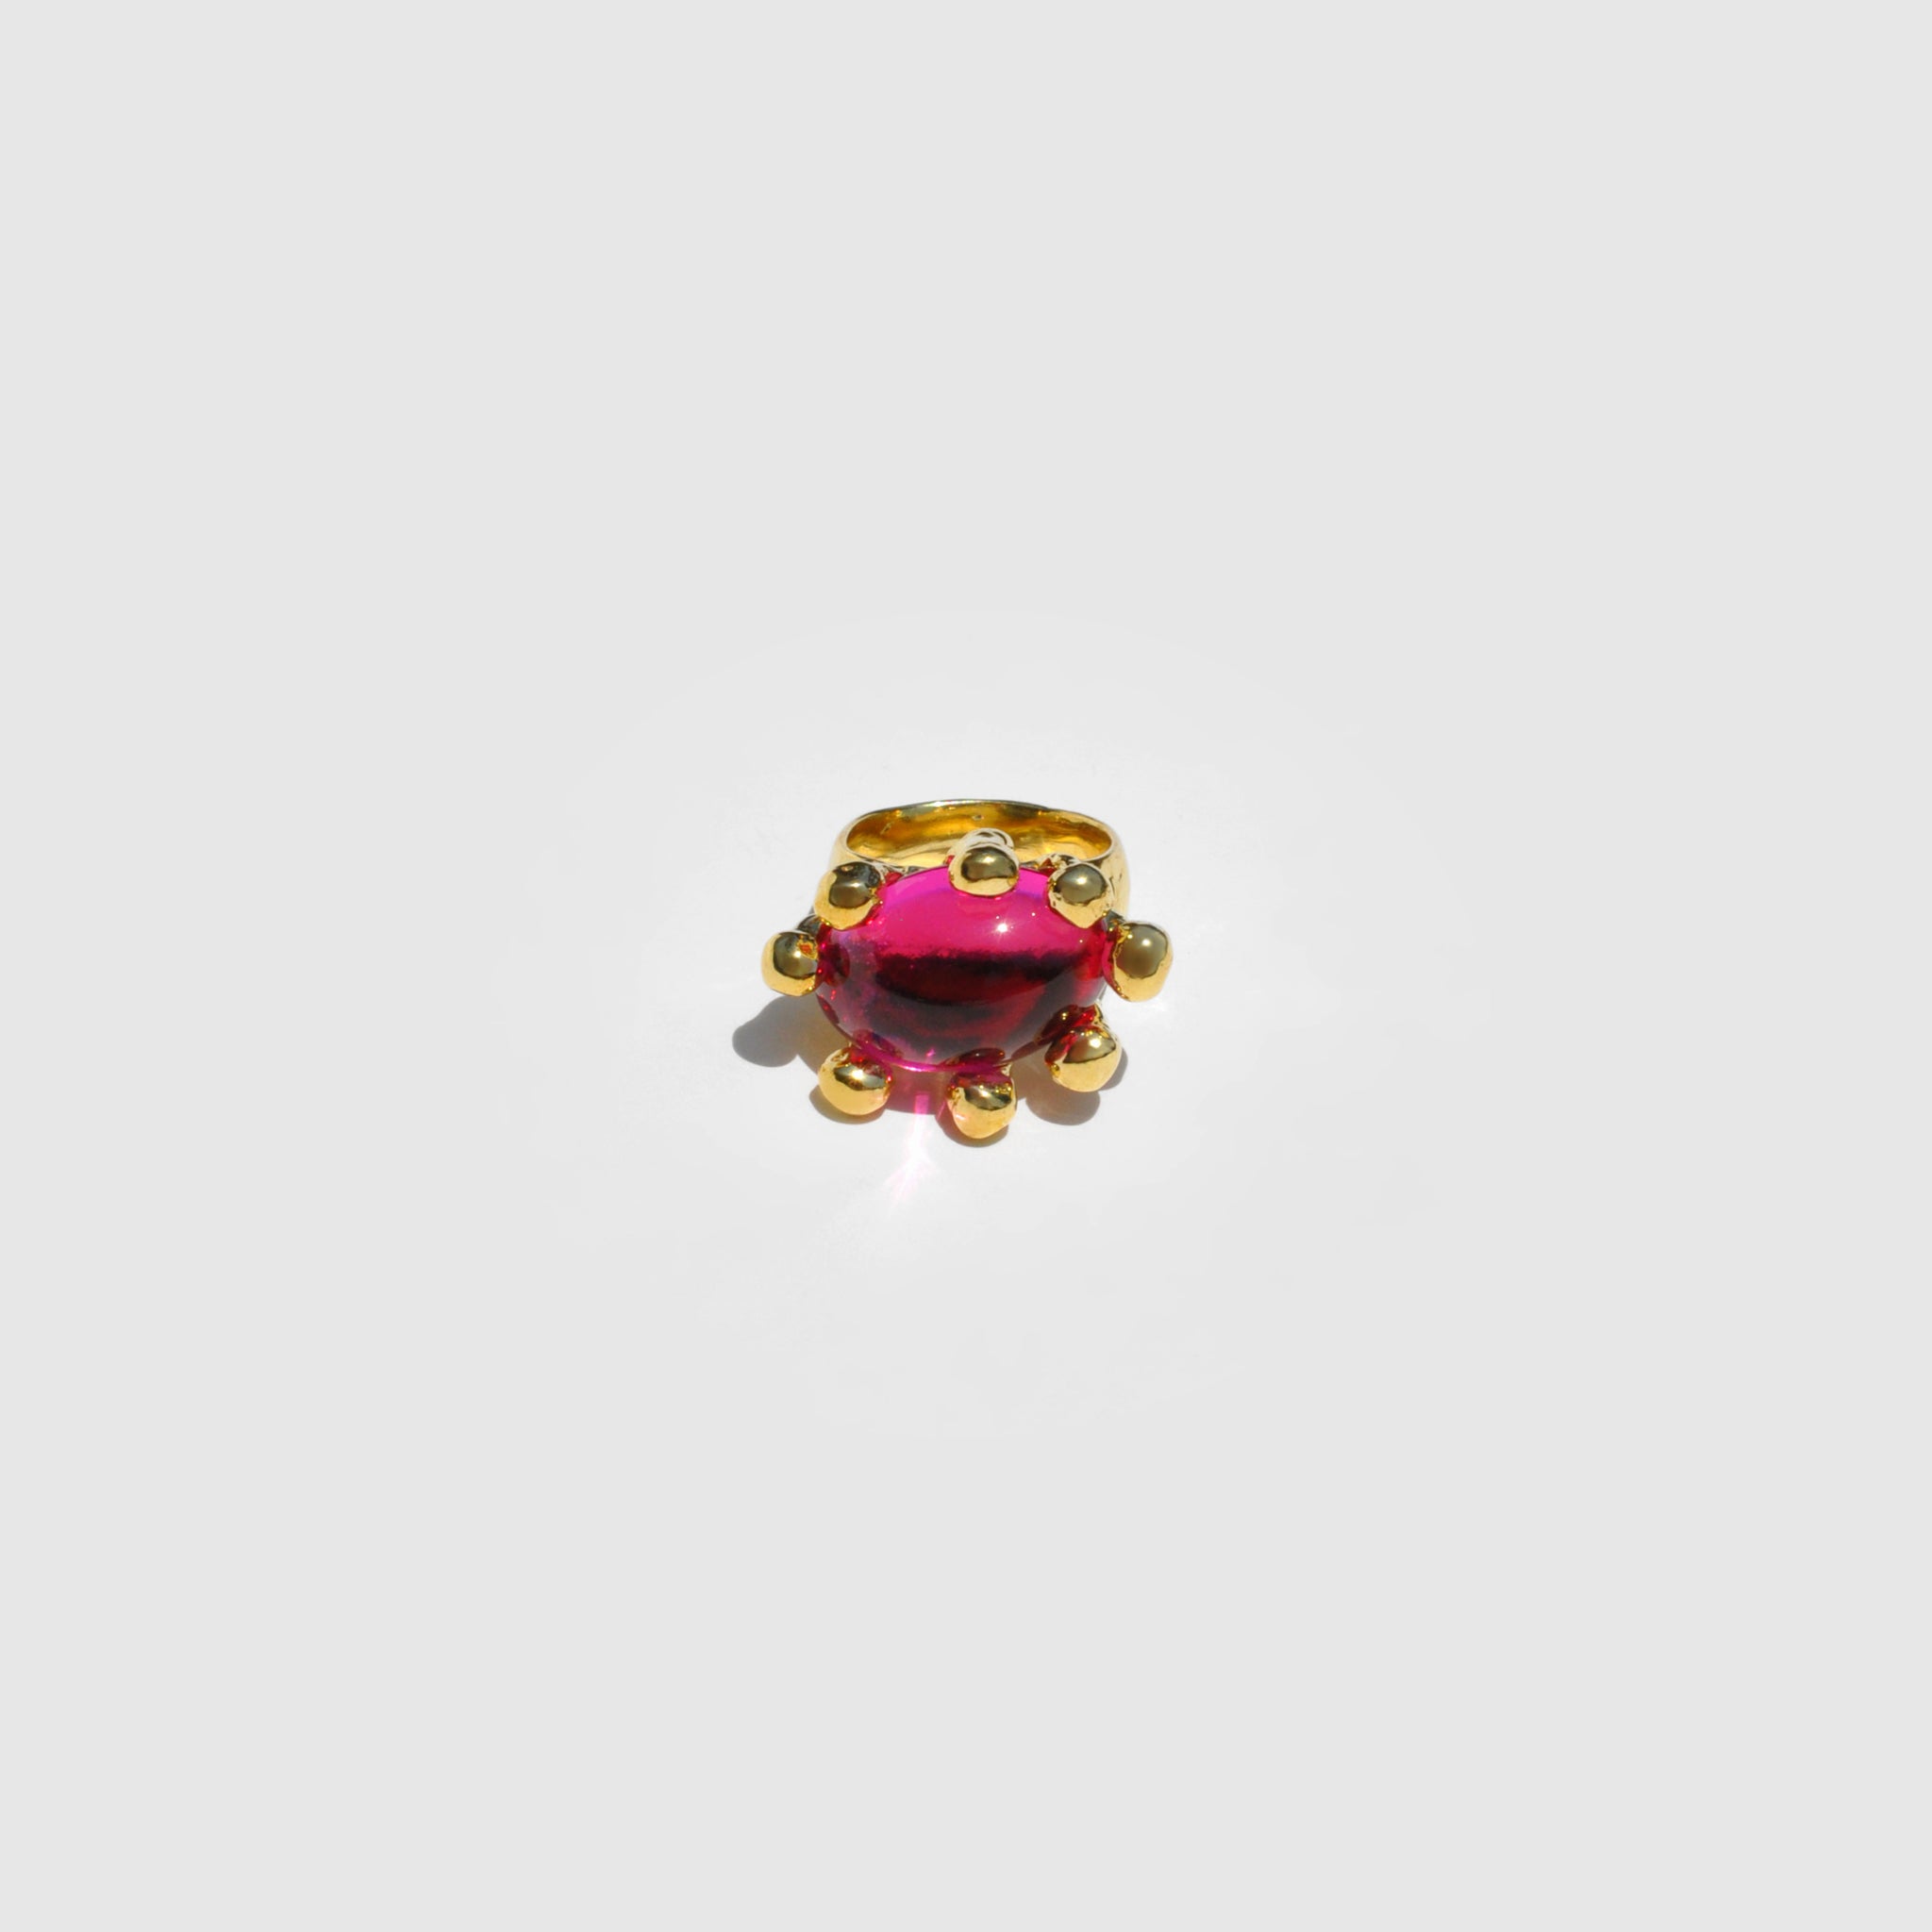 Diva Ring - Fuchsia from mondo mondo available at LCD, front view.